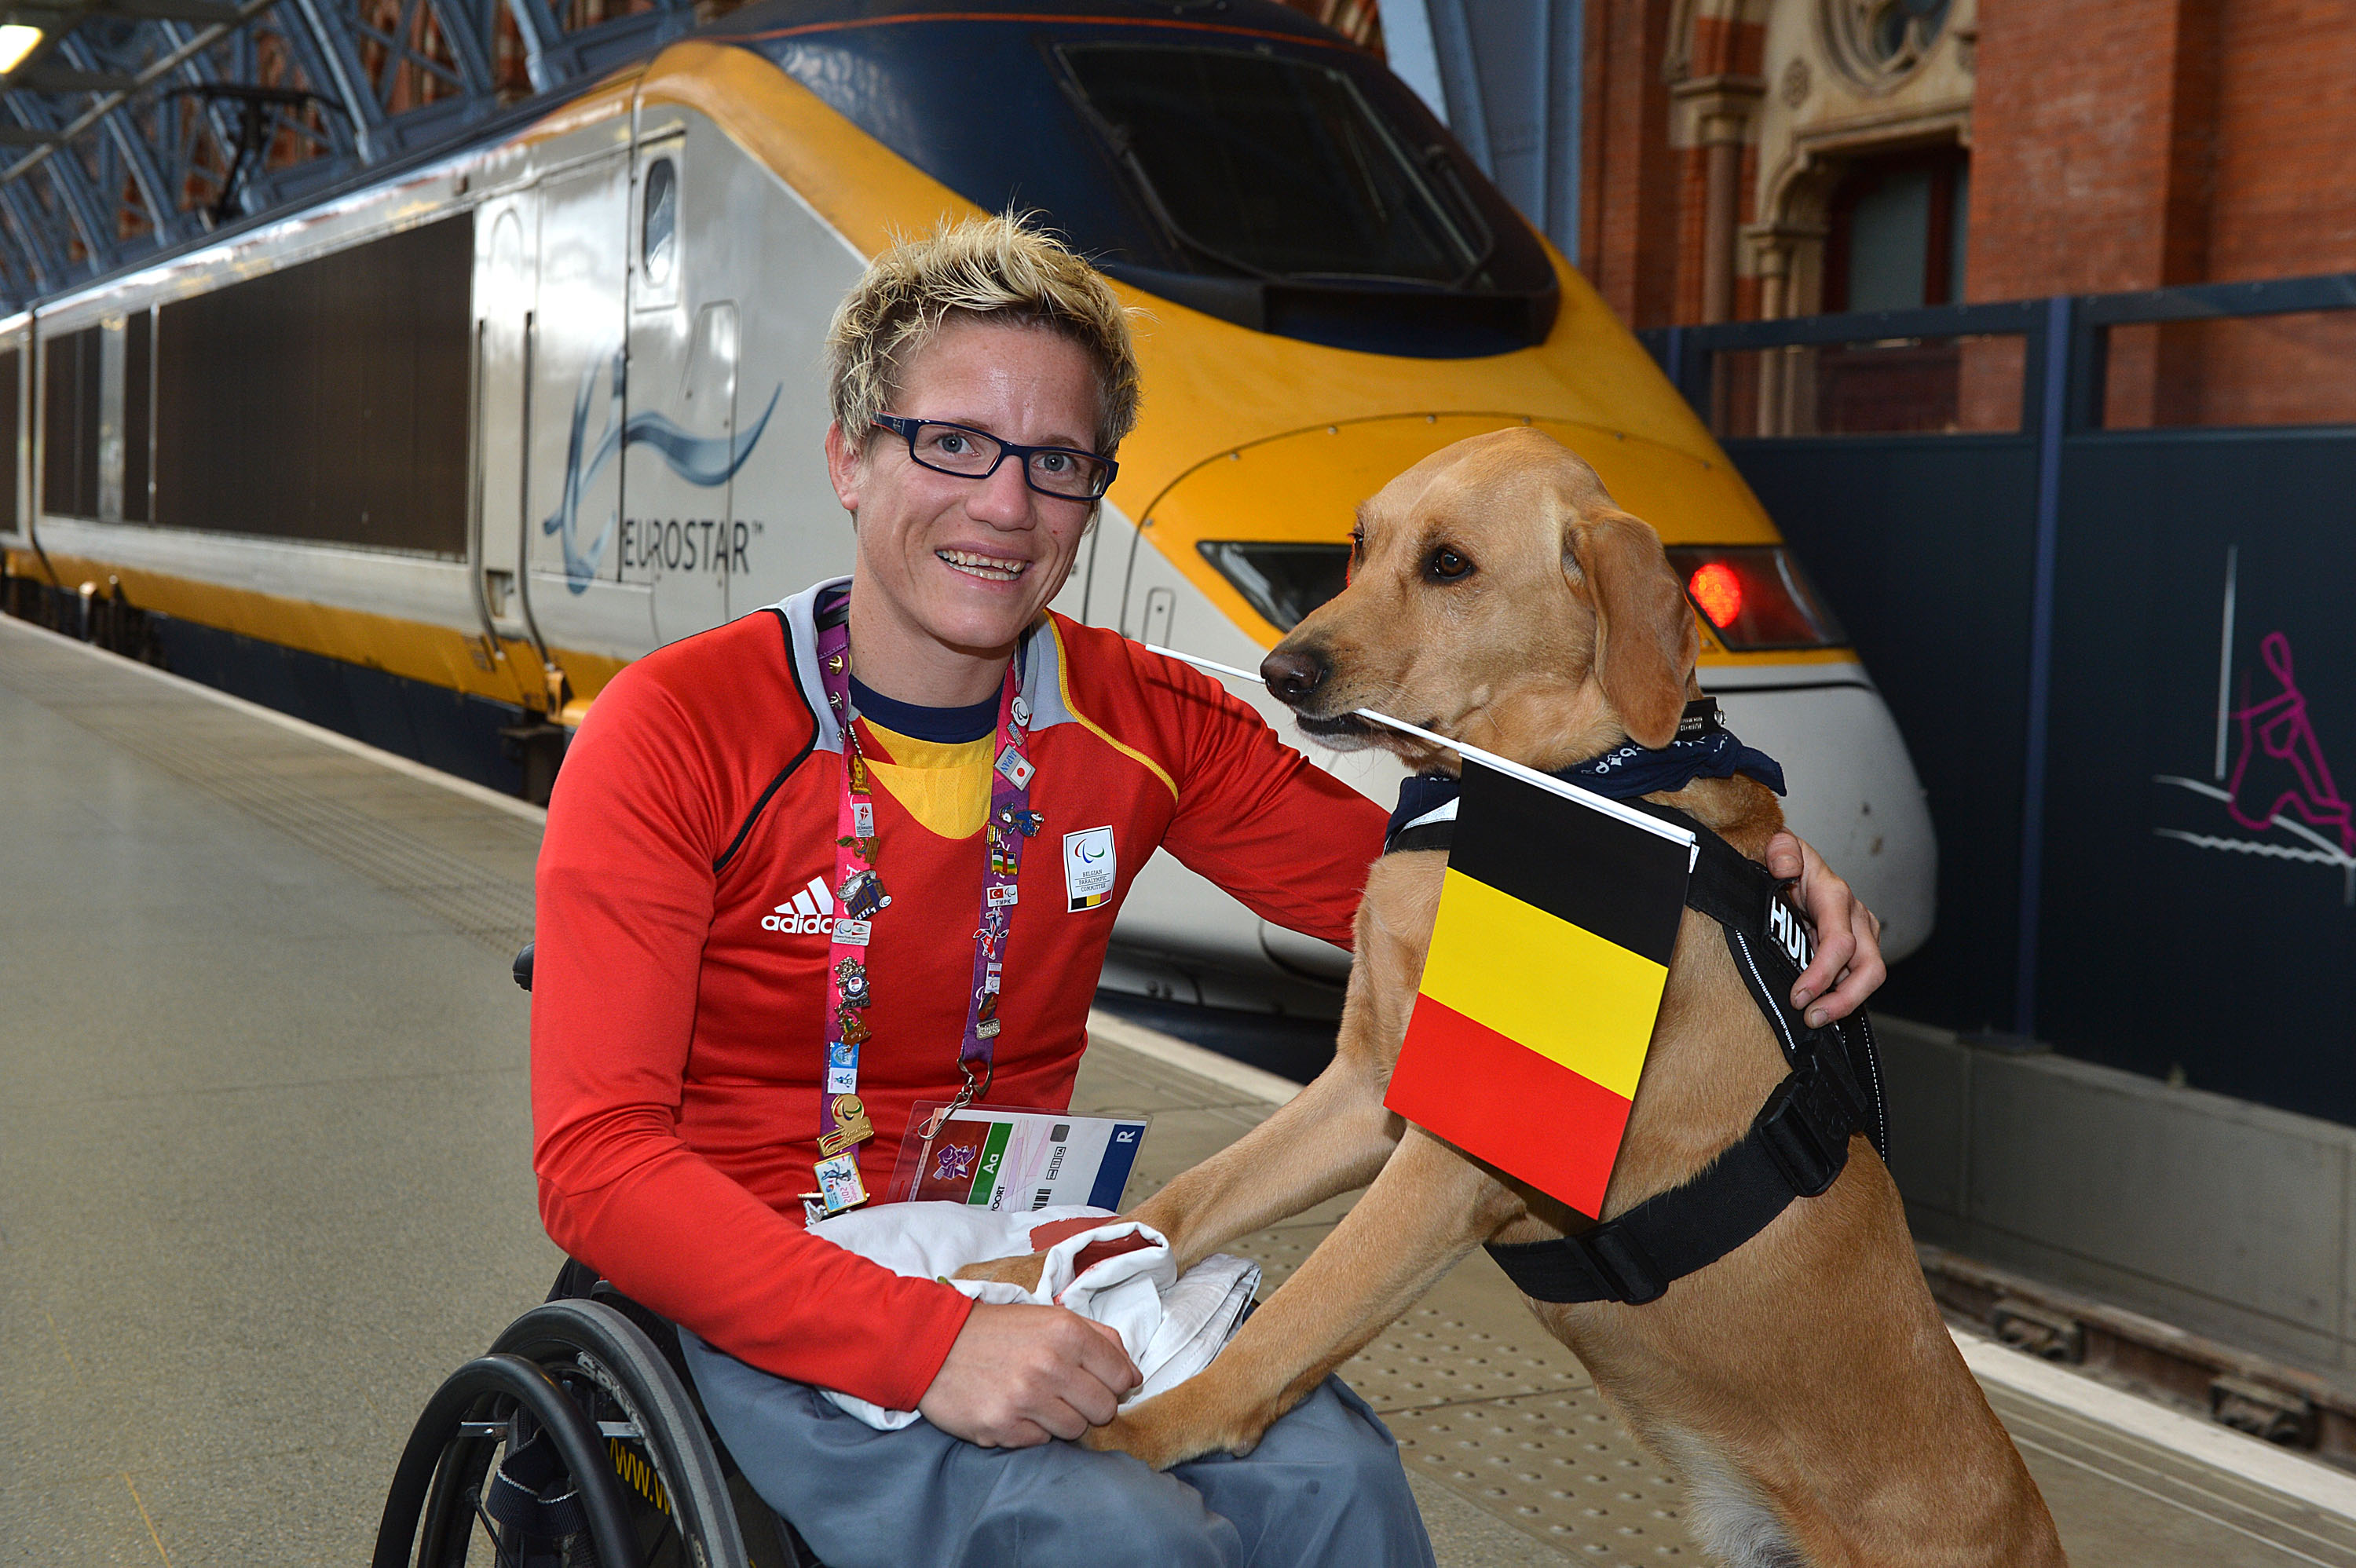 Belgian Paralympic 100m Gold and 200m Silver  medalist Marieke Vervoort and 'Help Hound' Zenn leave  the Eurostar terminal at  St. Pancras, London, UK, on Monday, Sept. 10, 2012. (Photo by Mark Allan/AP Images for Eurostar)